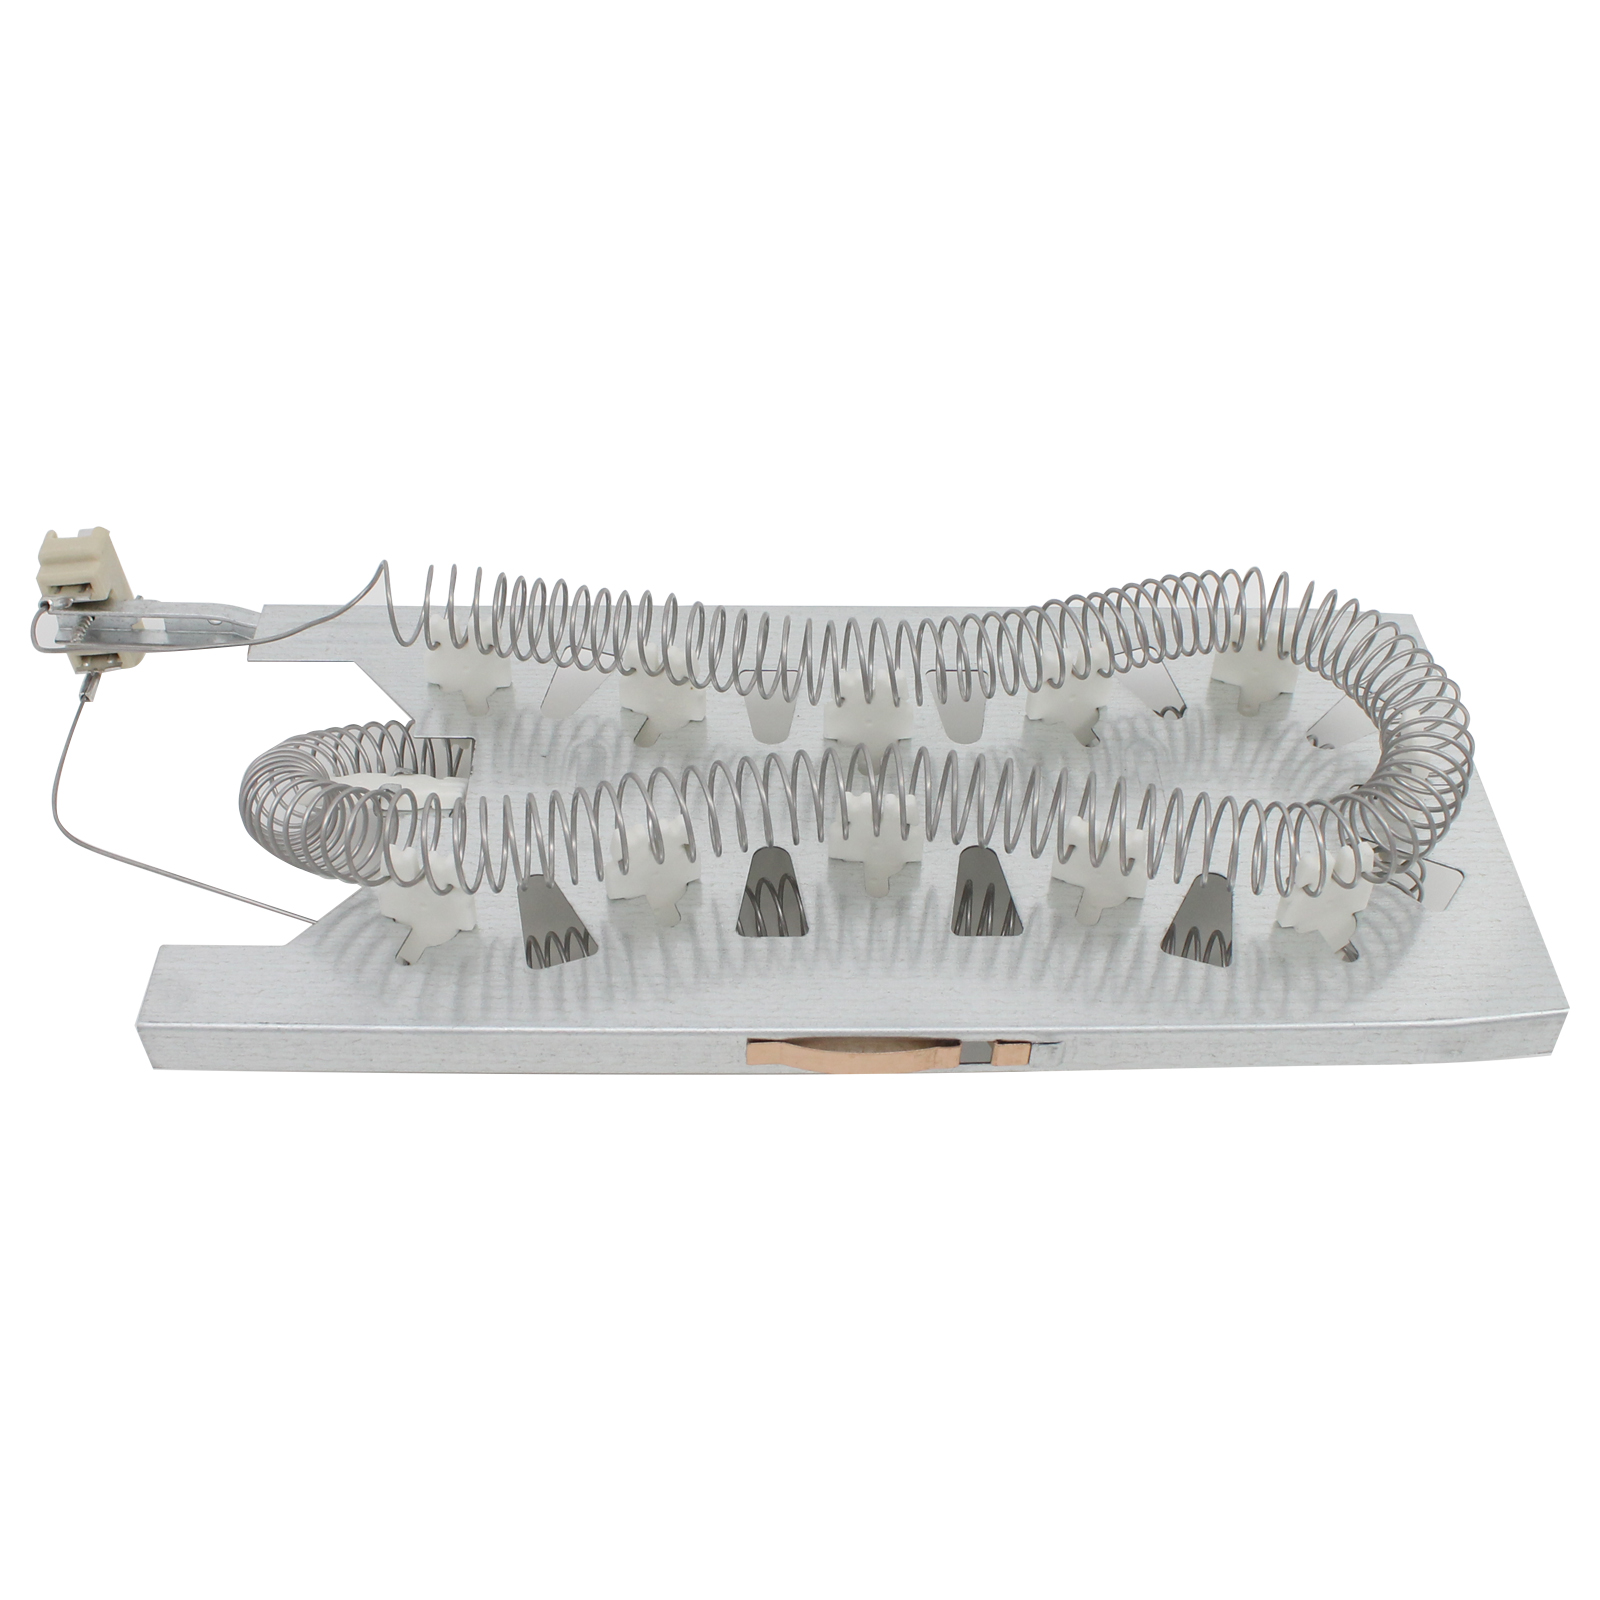 3387747 Dryer Heating Element & 279769 Thermal Cut-Off Kit Replacement for Kenmore / Sears 11063022102 Dryer - Compatible with WP3387747 & 279769 Heater Element & Thermal Fuse Kit - image 3 of 4